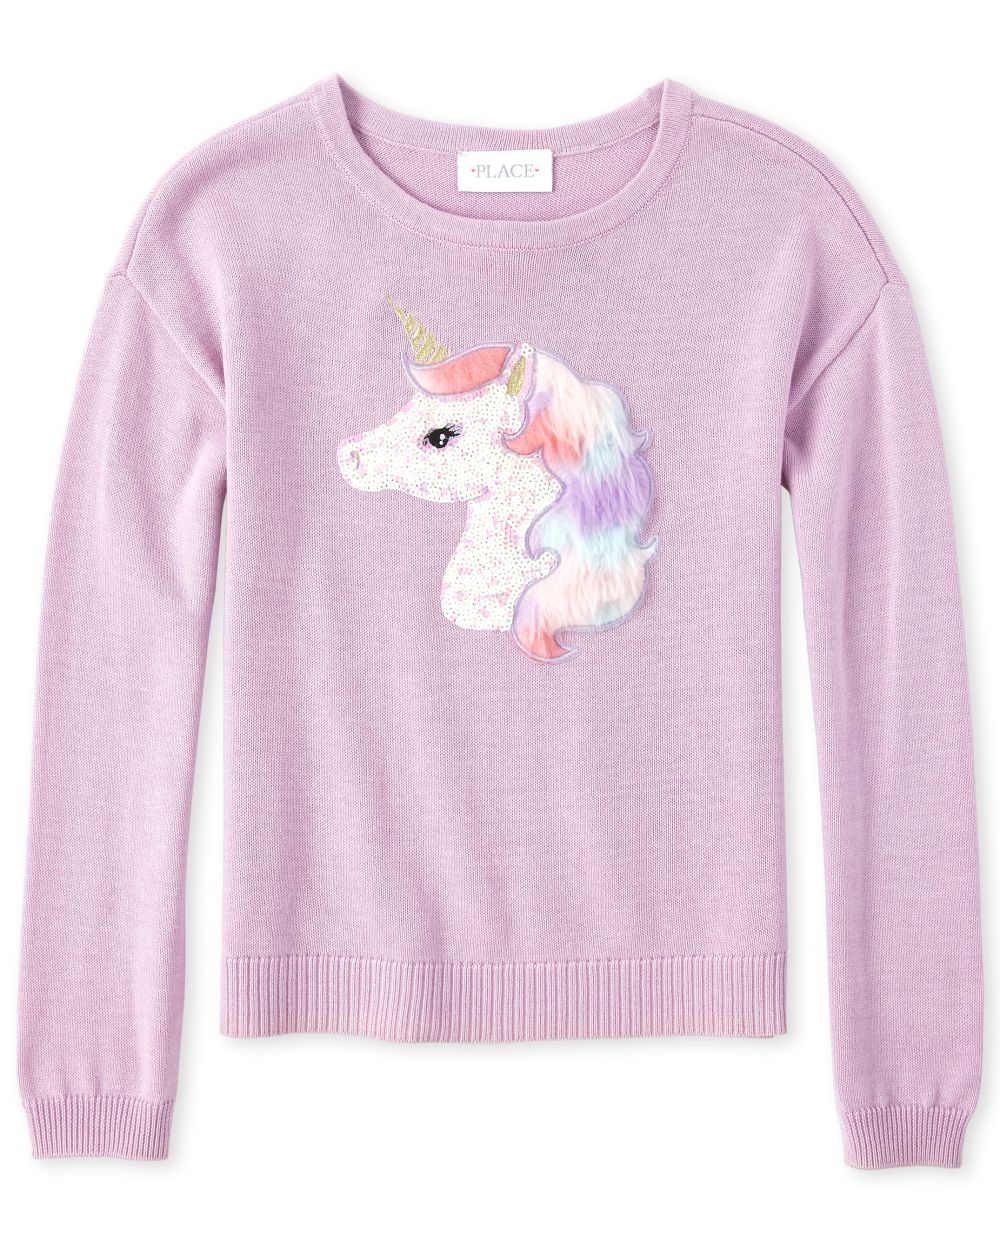 Girls Long Sleeve Sequin And Faux Fur Unicorn Sweater